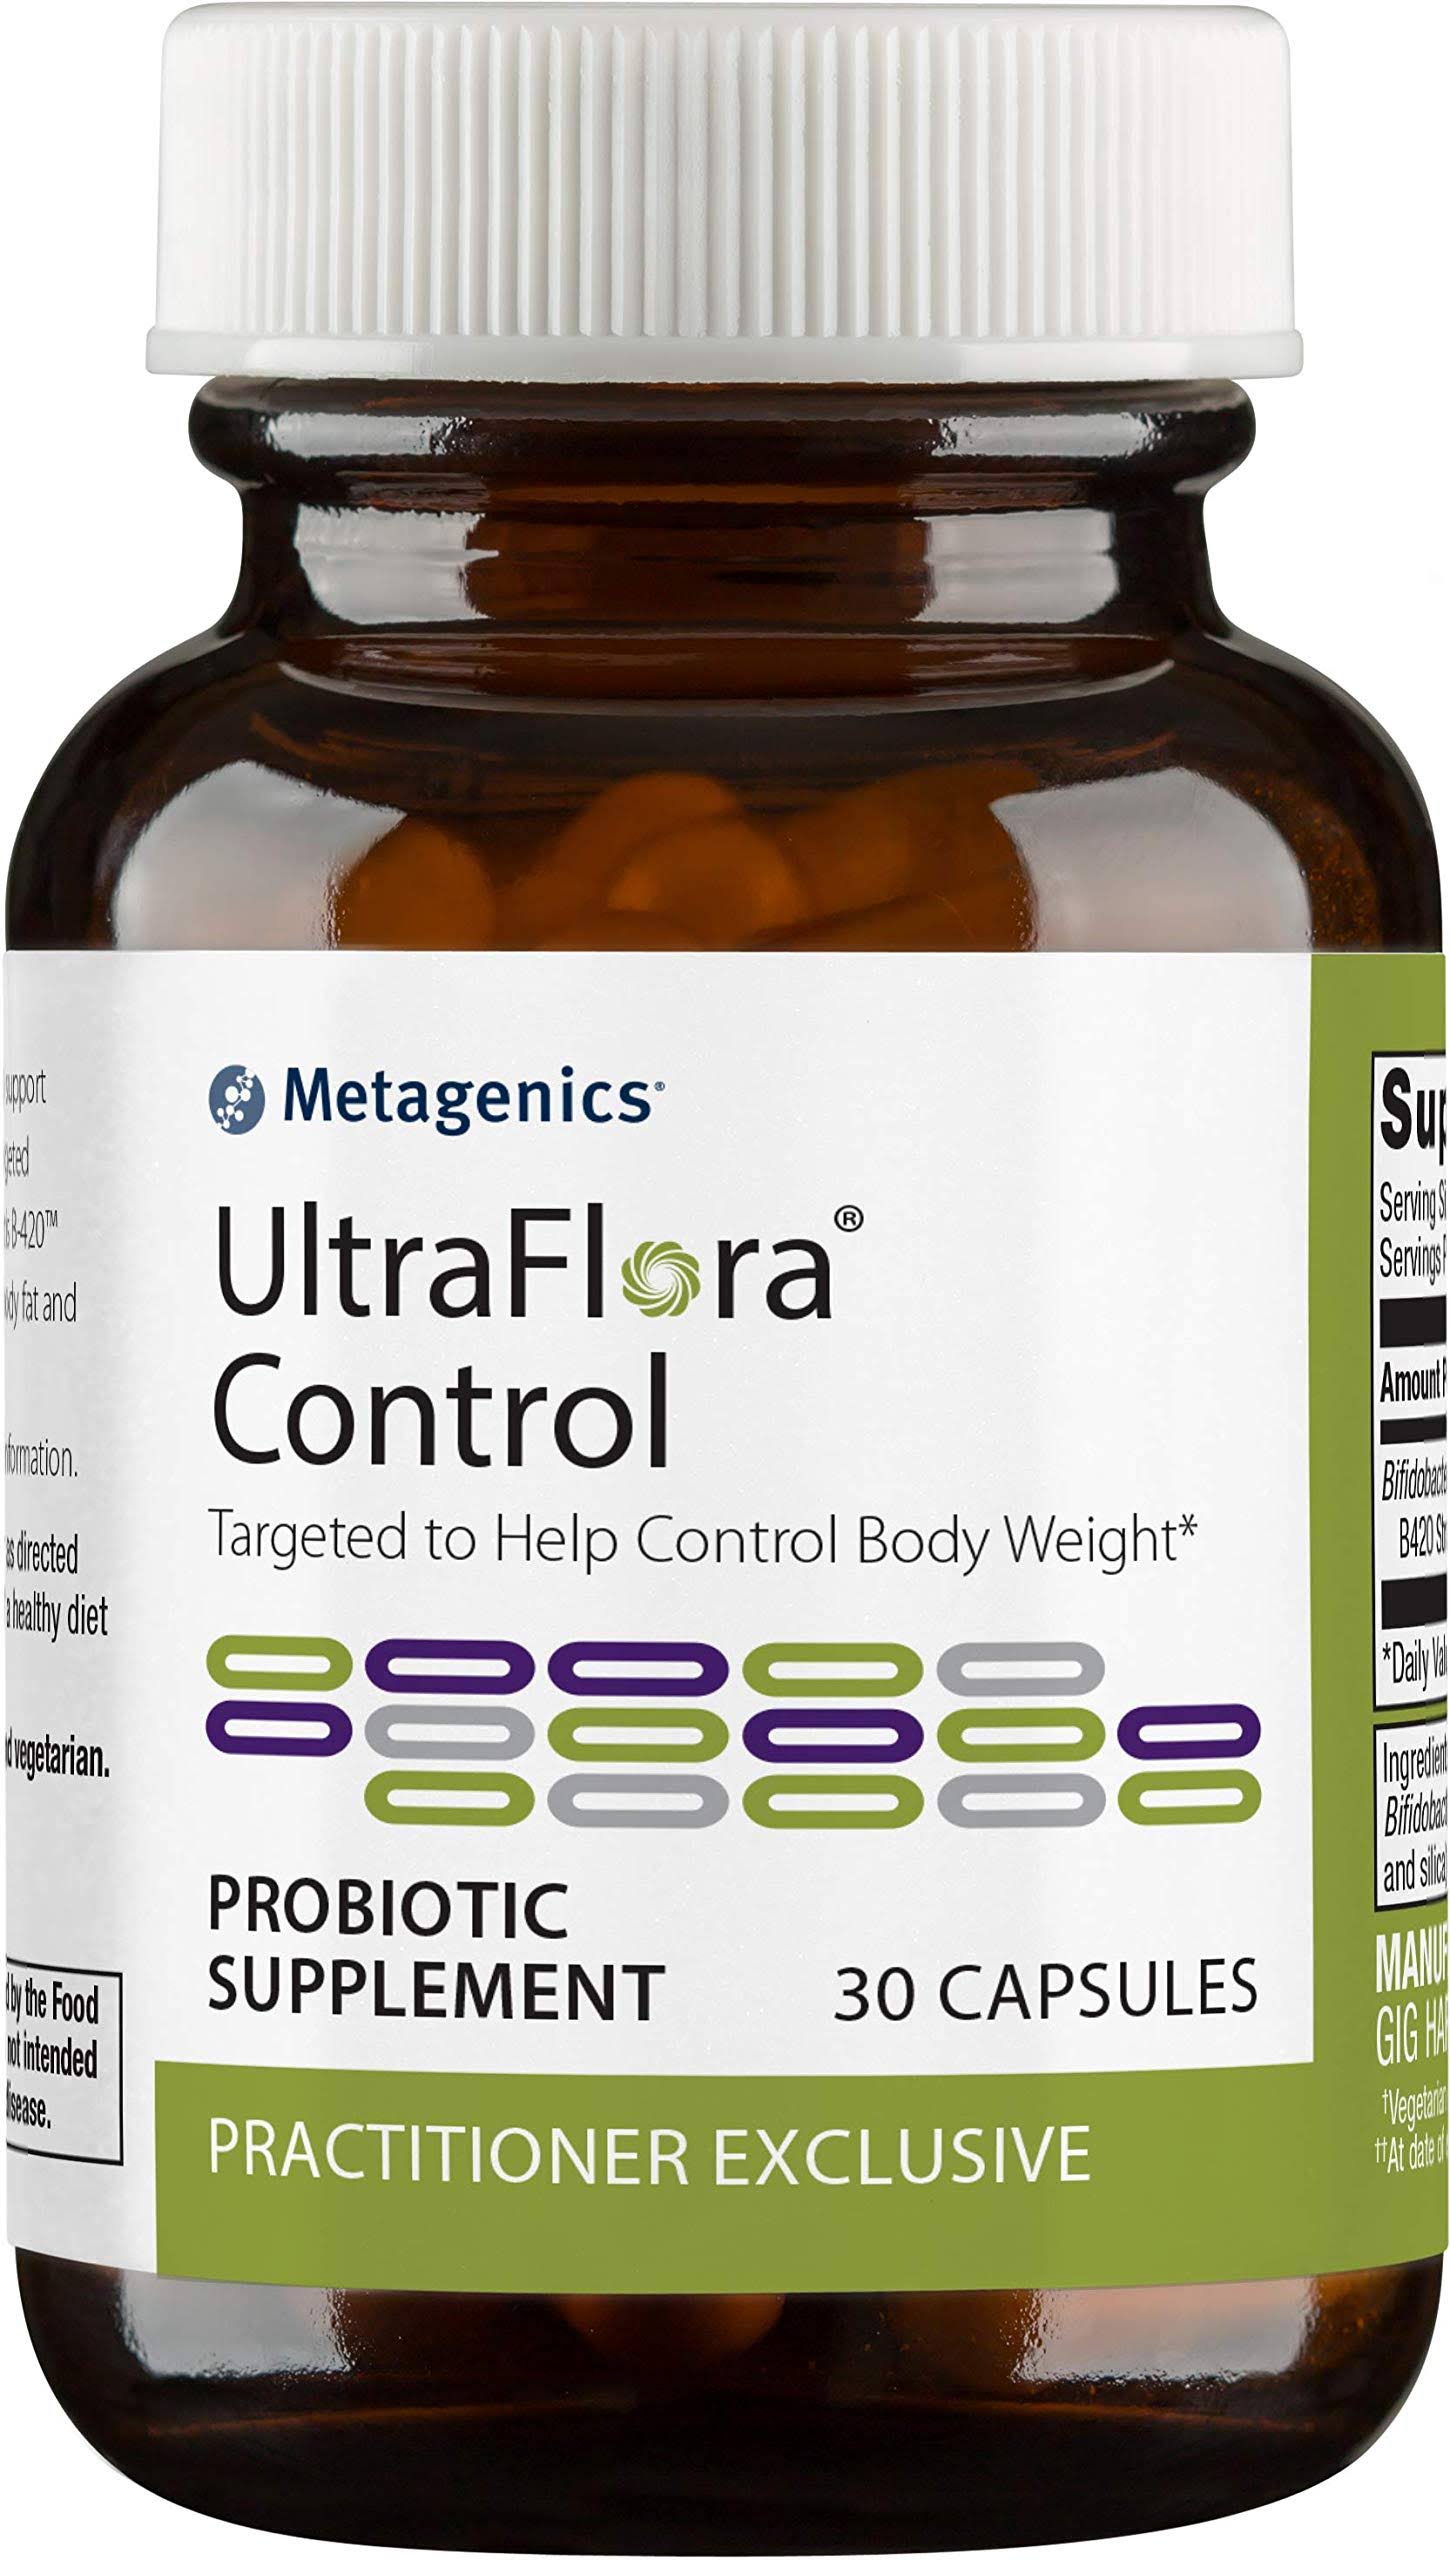 Metagenics UltraFlora Control, Daily Probiotic Supplement To Help Support Healthy Body Weight Regulation - 30 Servings